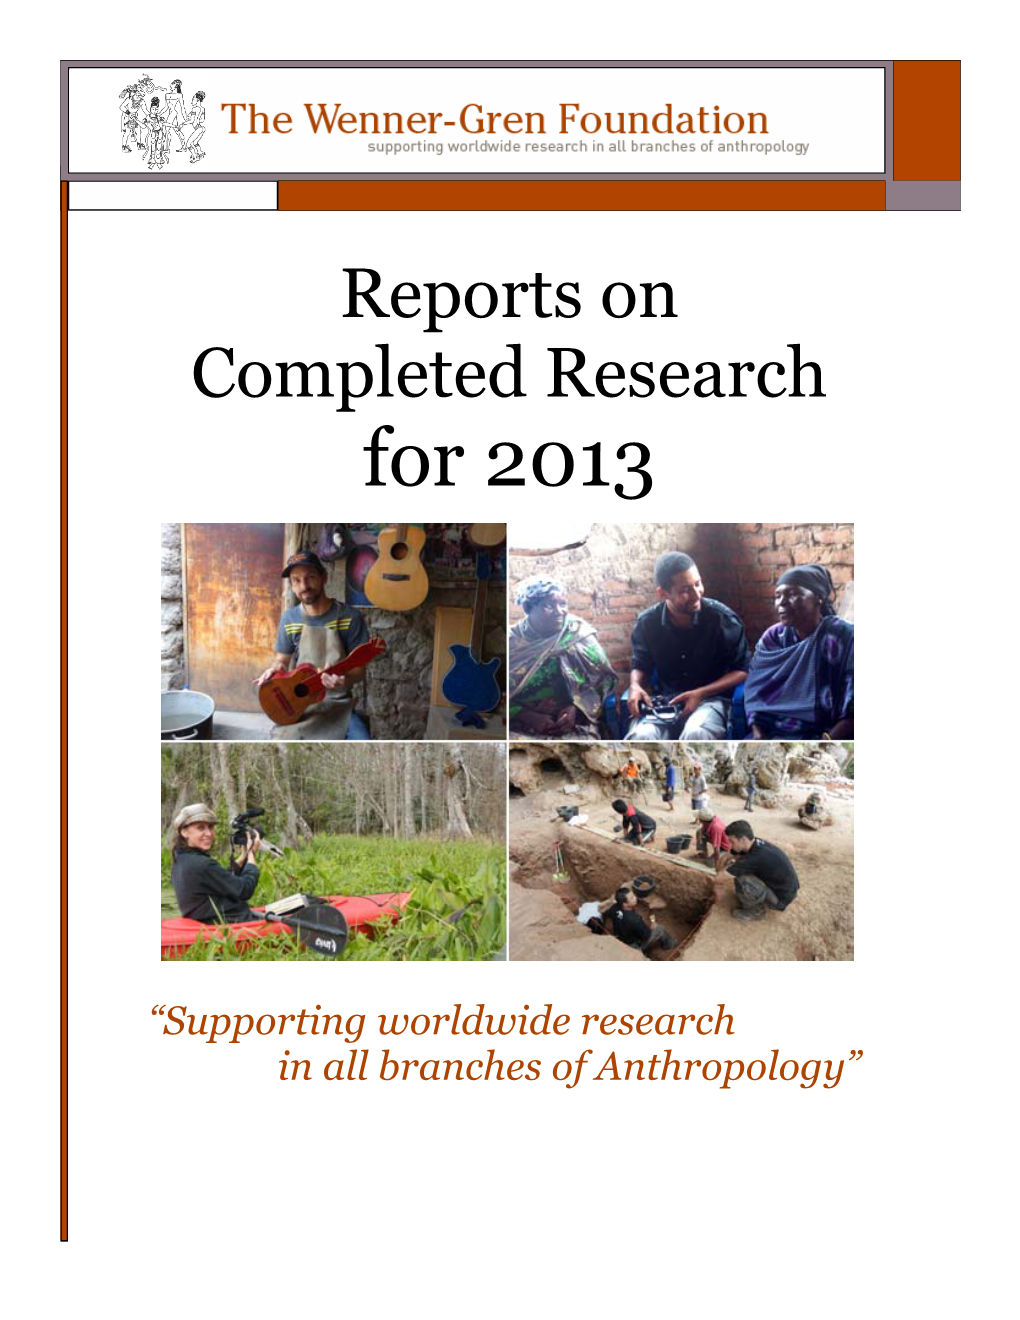 Reports on Completed Research for 2013